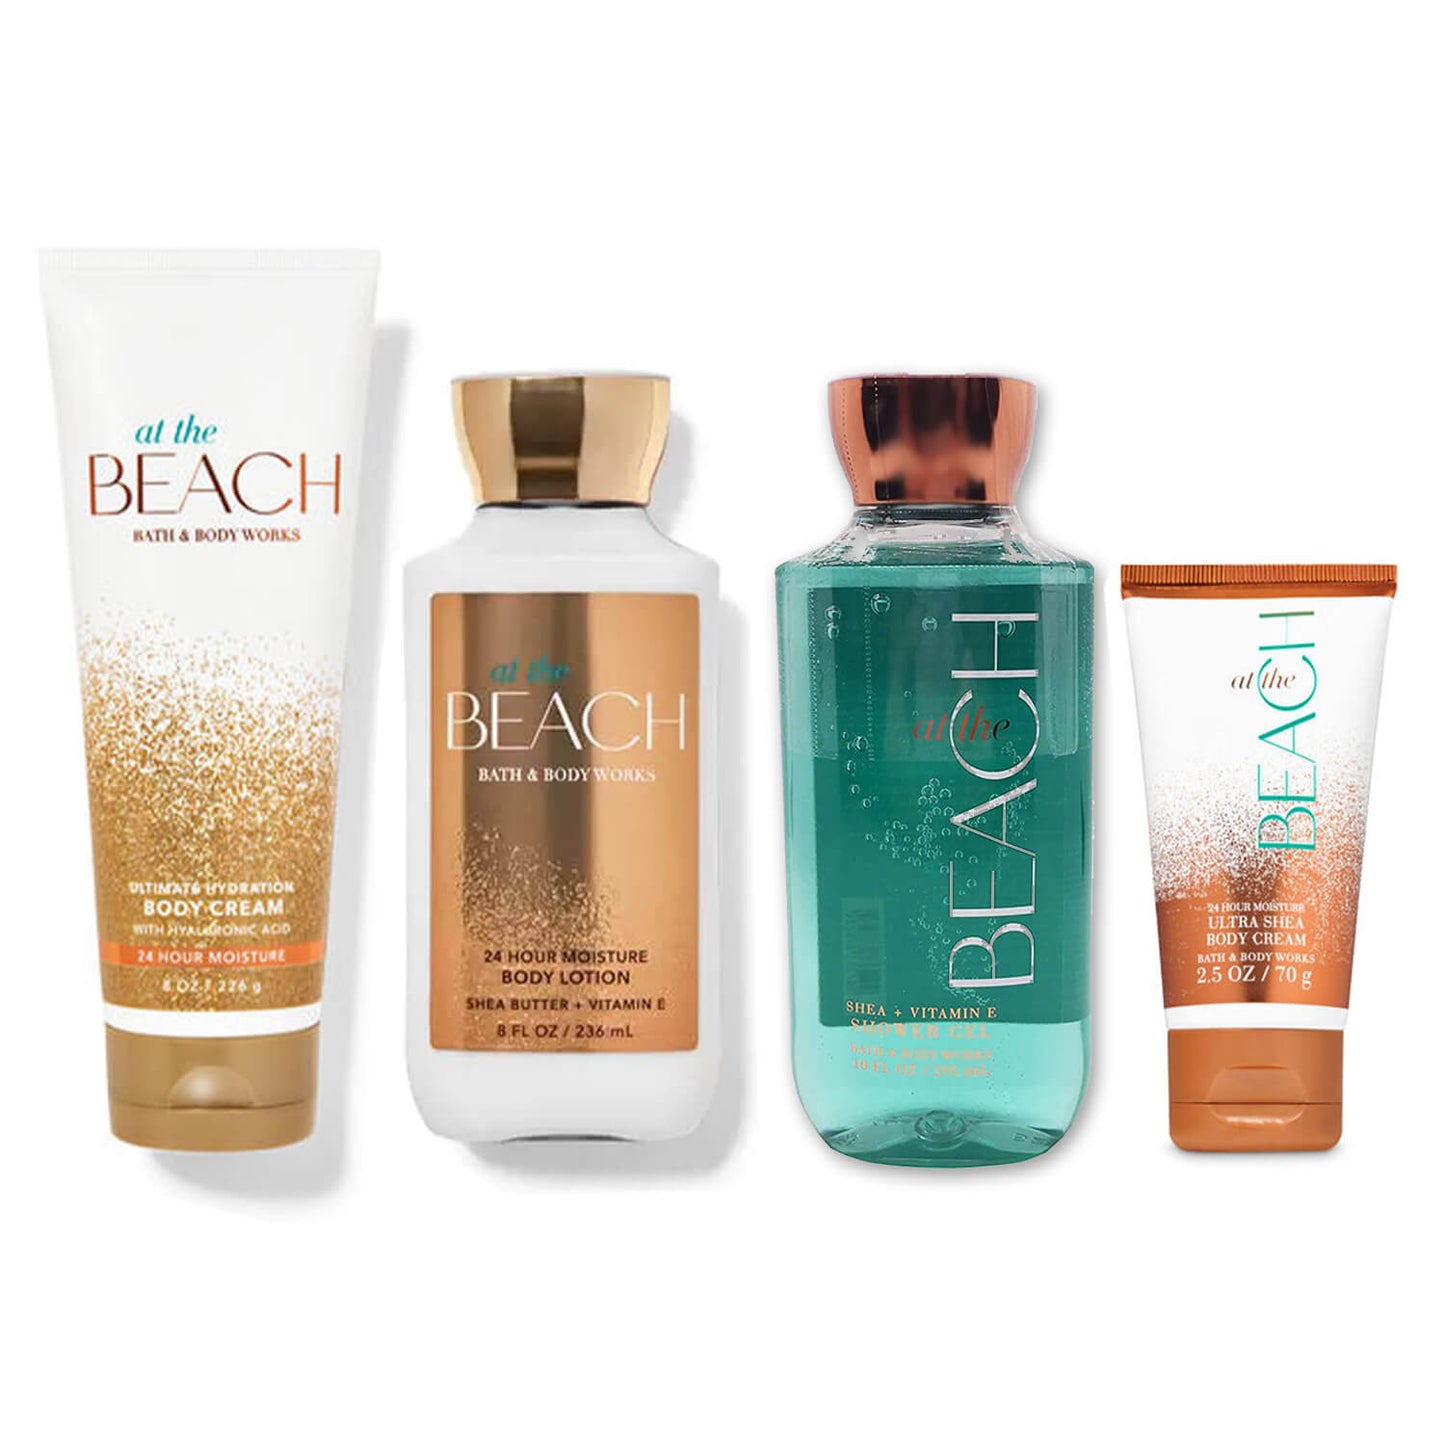 Bath and Body Works Savers Bundle - At The Beach